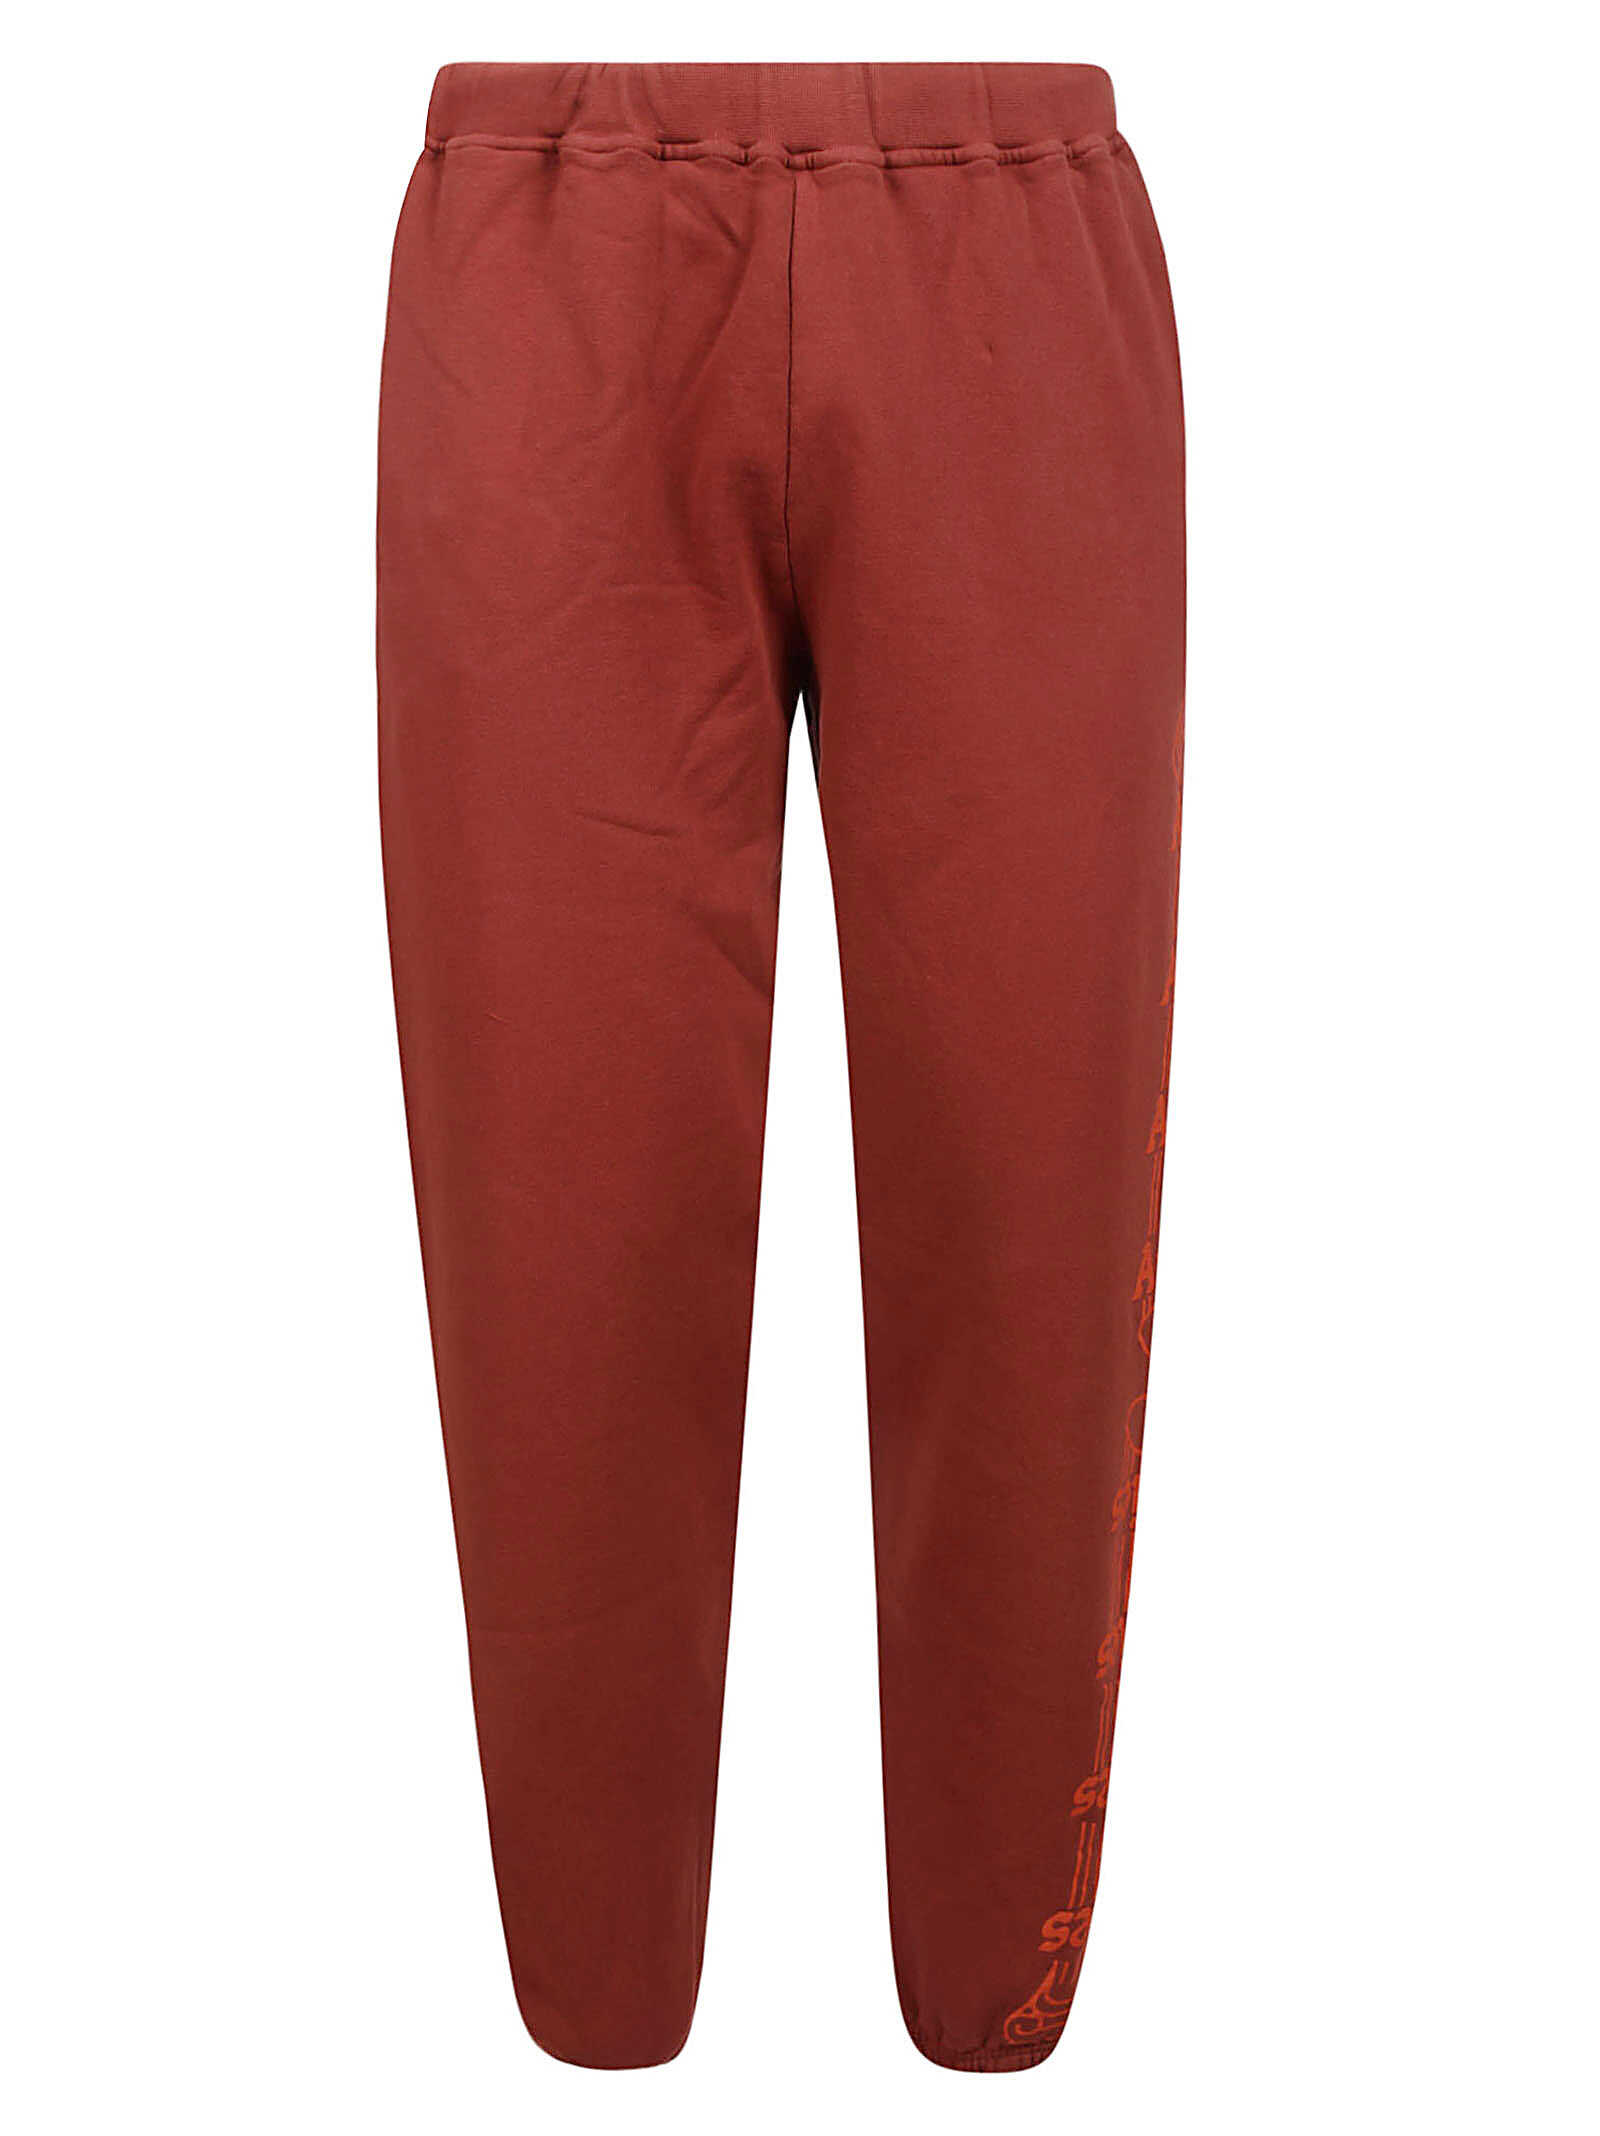 Aries Aries Trouser SSAR30001 RSW ROSEWOOD Rsw Rosewood